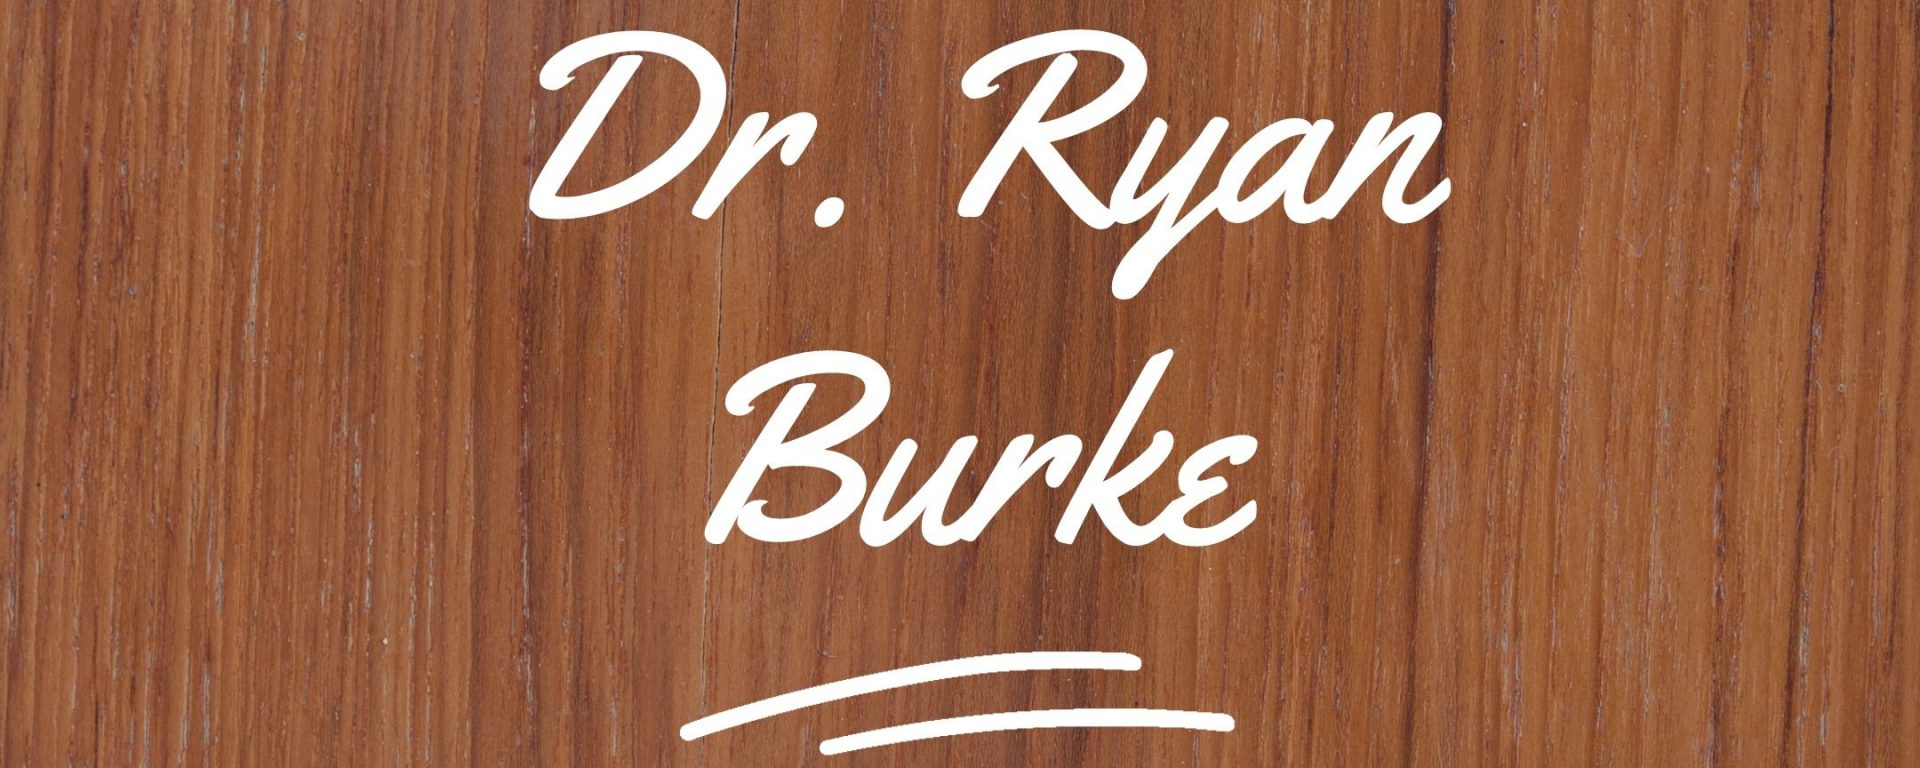 Honoring Our Own Awards Recognizes Adult Education Director Dr. Ryan Burke